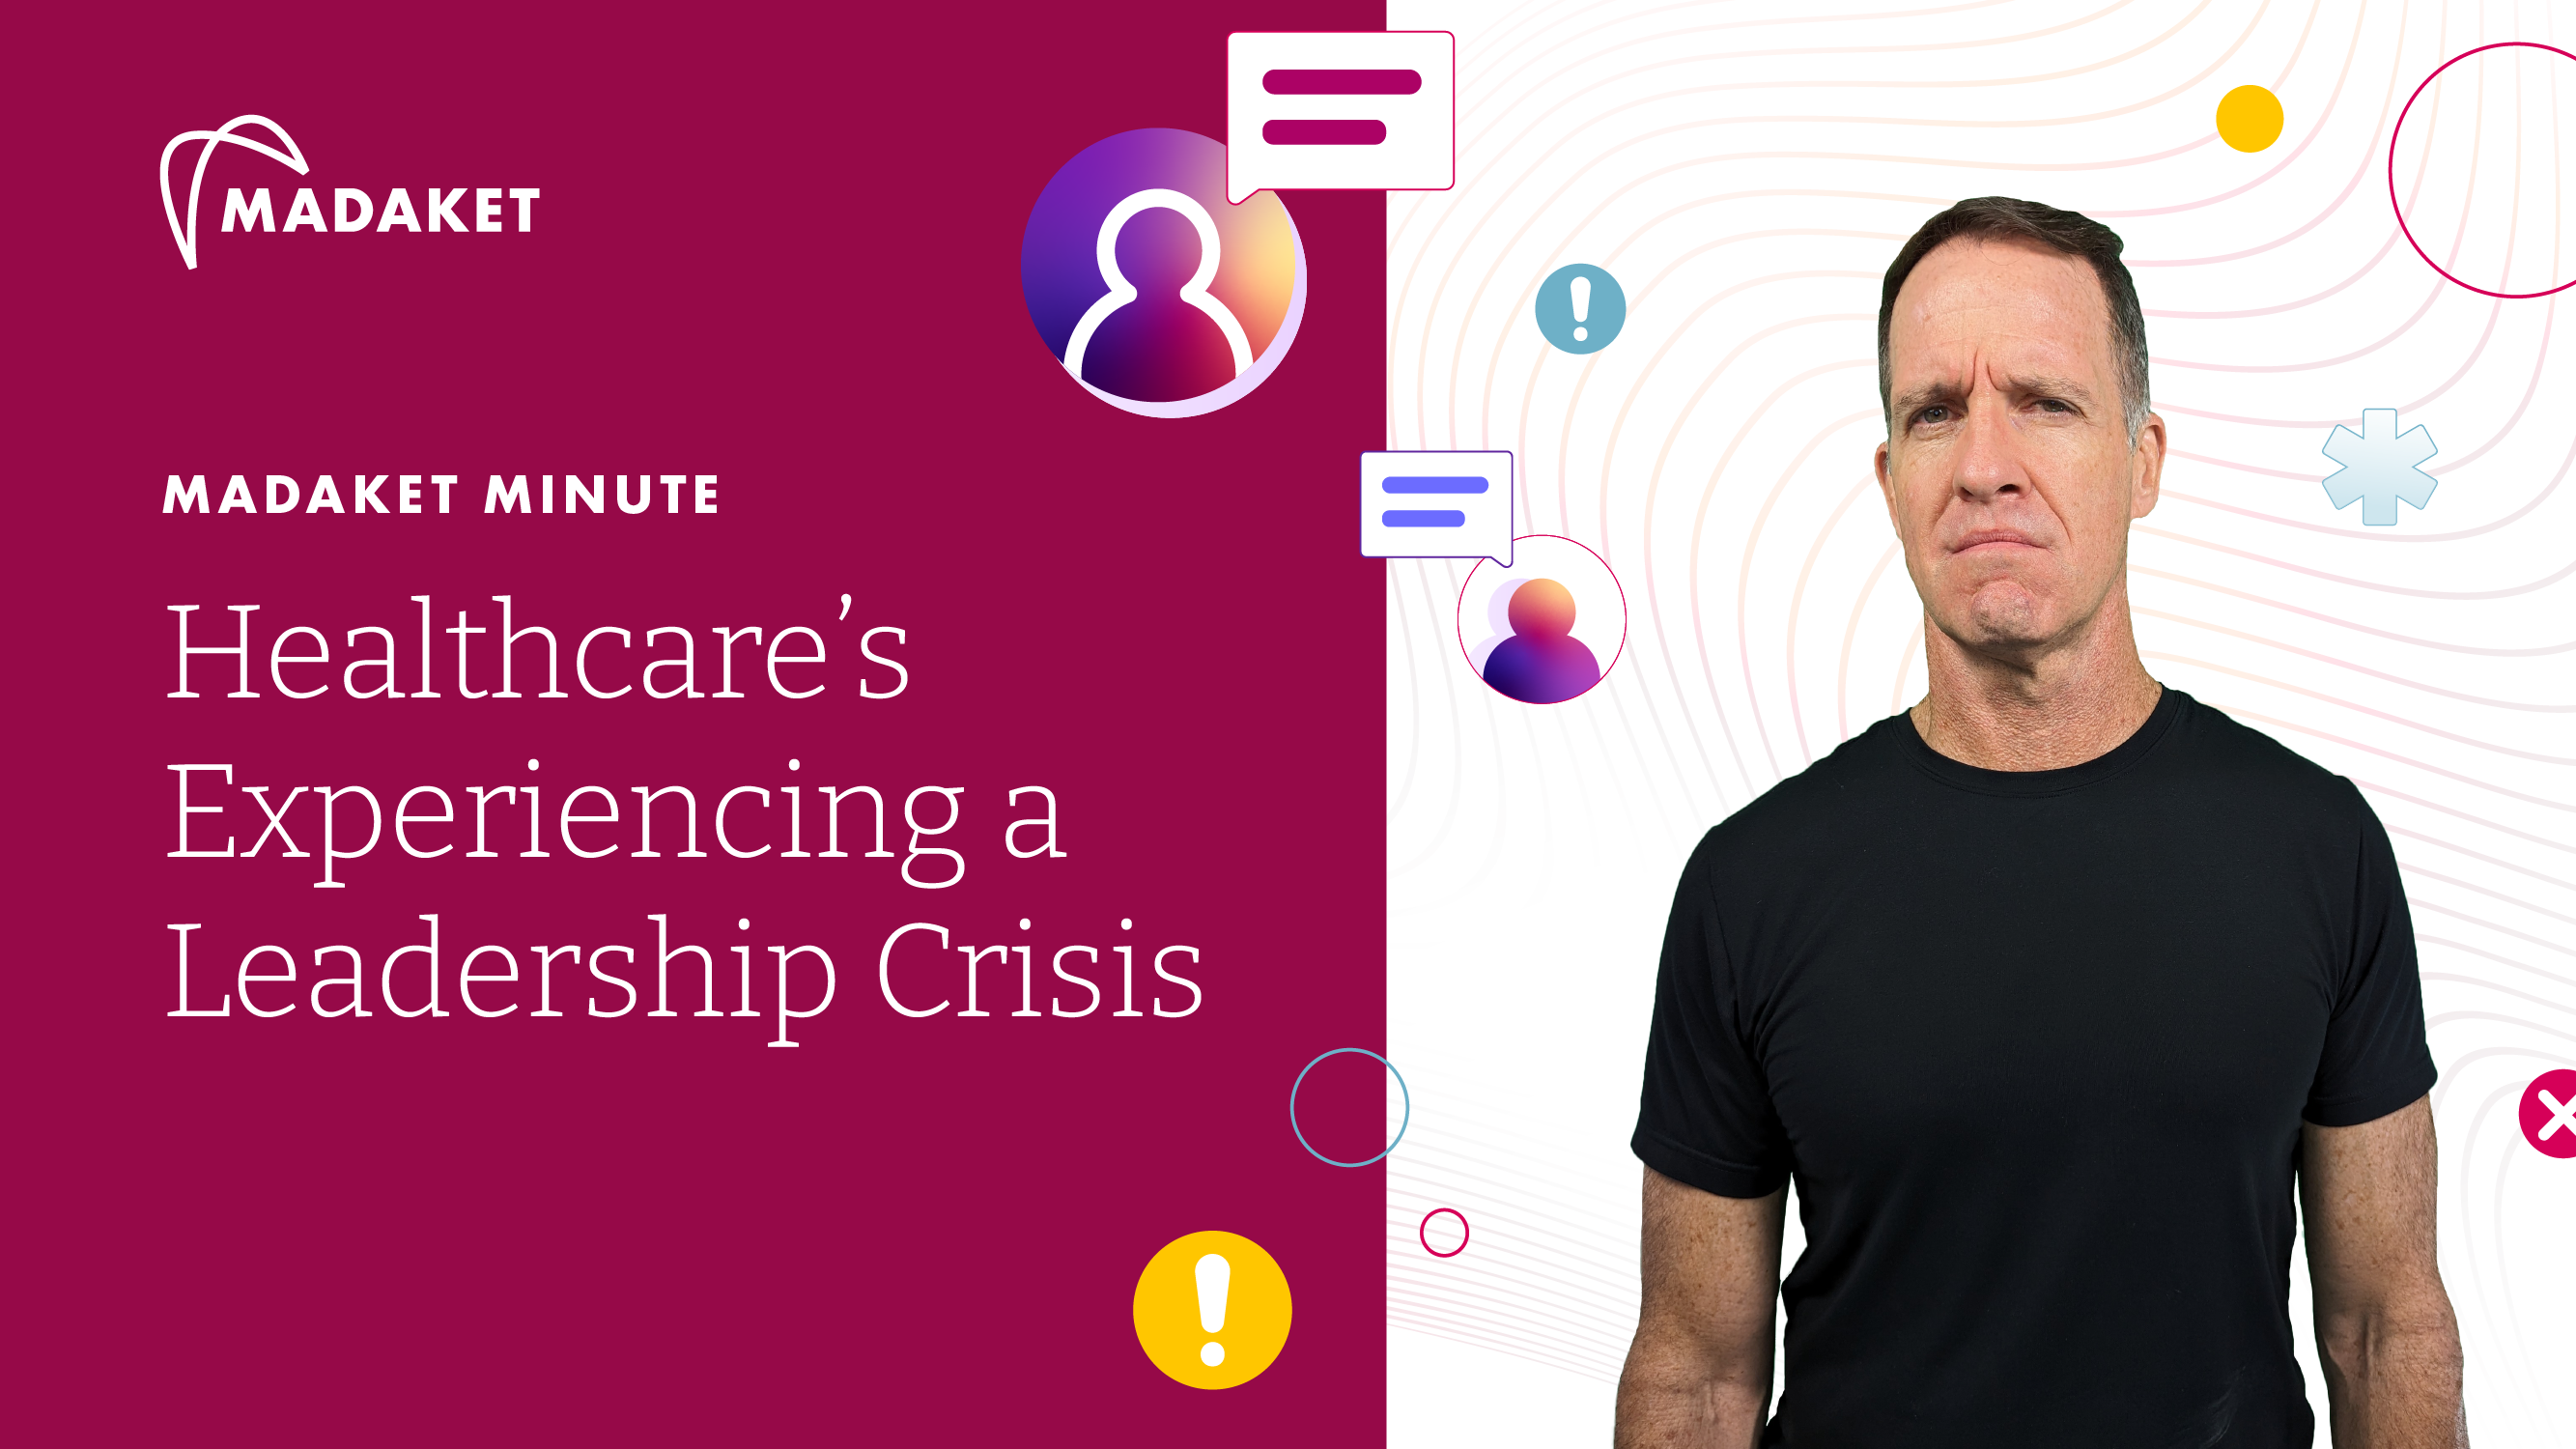 Madaket Minute - Healthcare is experiencing a leadership crisis feature image